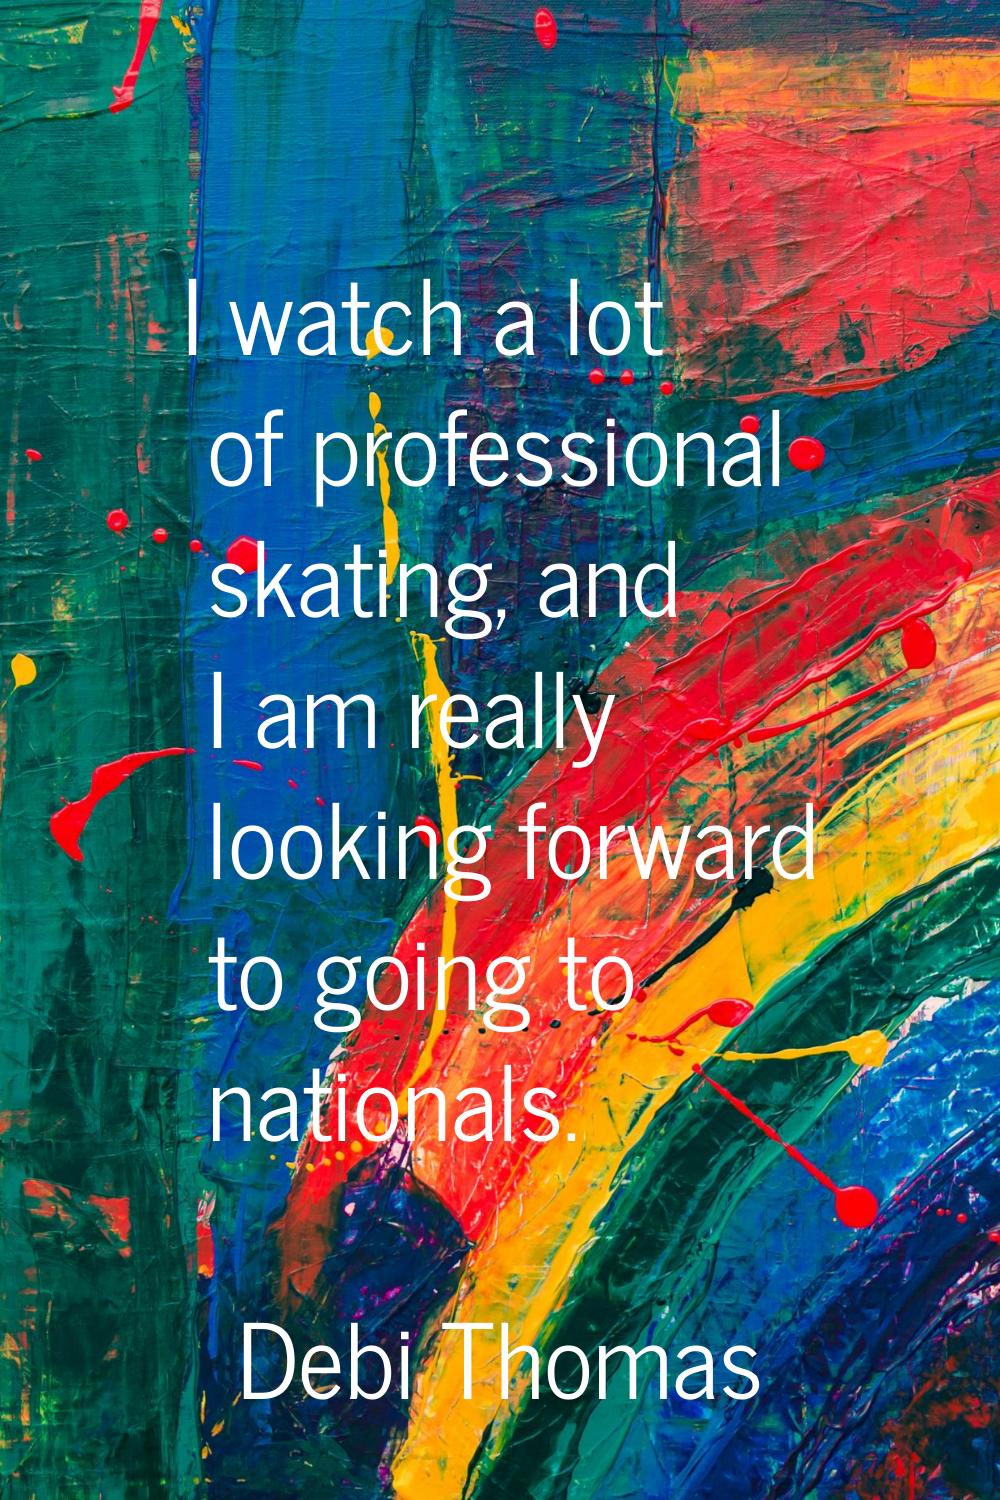 I watch a lot of professional skating, and I am really looking forward to going to nationals.